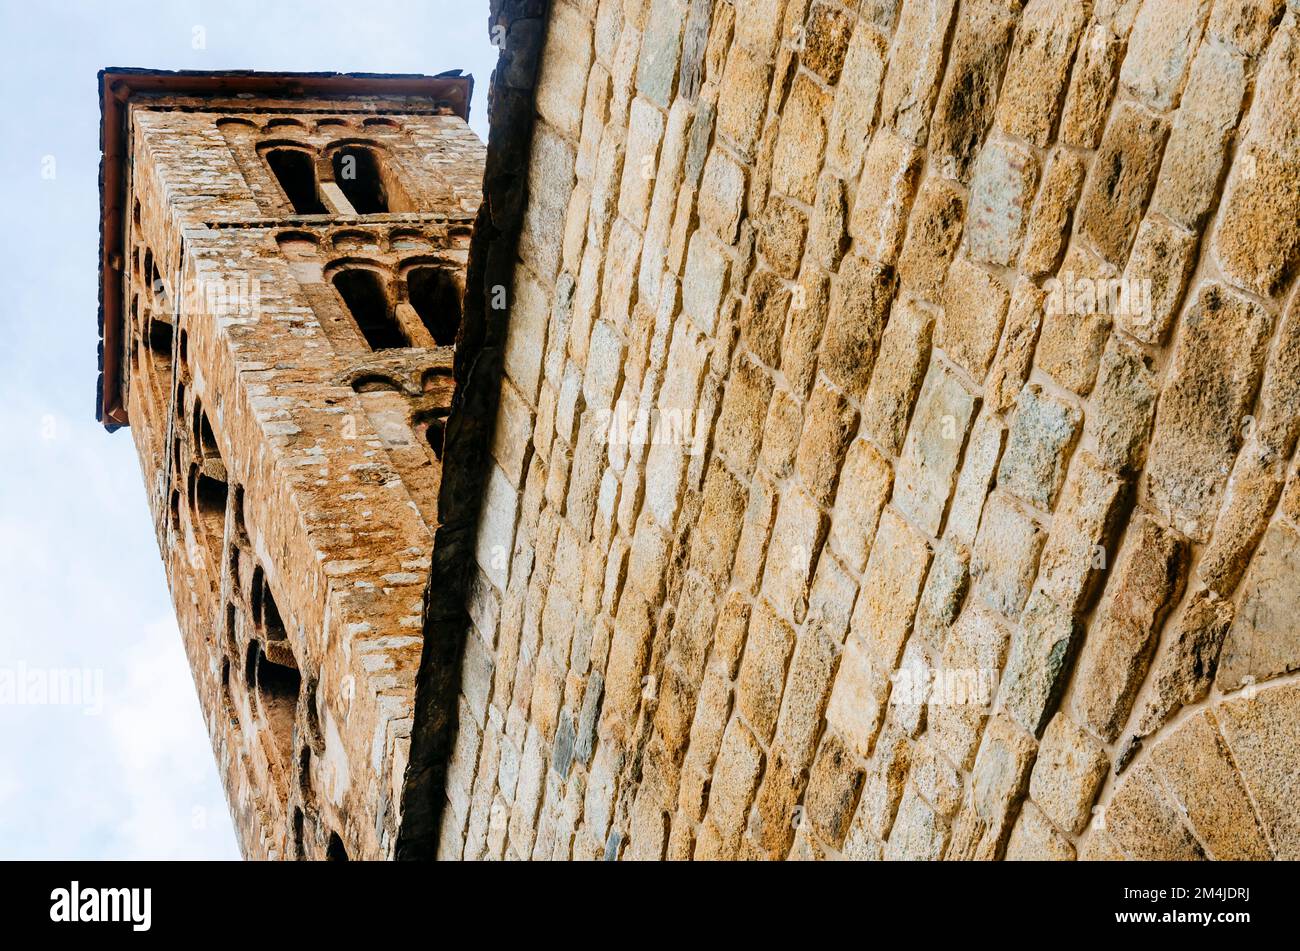 Detail of the bell tower. Santa Maria de Taüll is a Romanesque church situated in the territory of Vall de Boí. Taüll, Vall de Boí, Lérida,Catalonia, Stock Photo